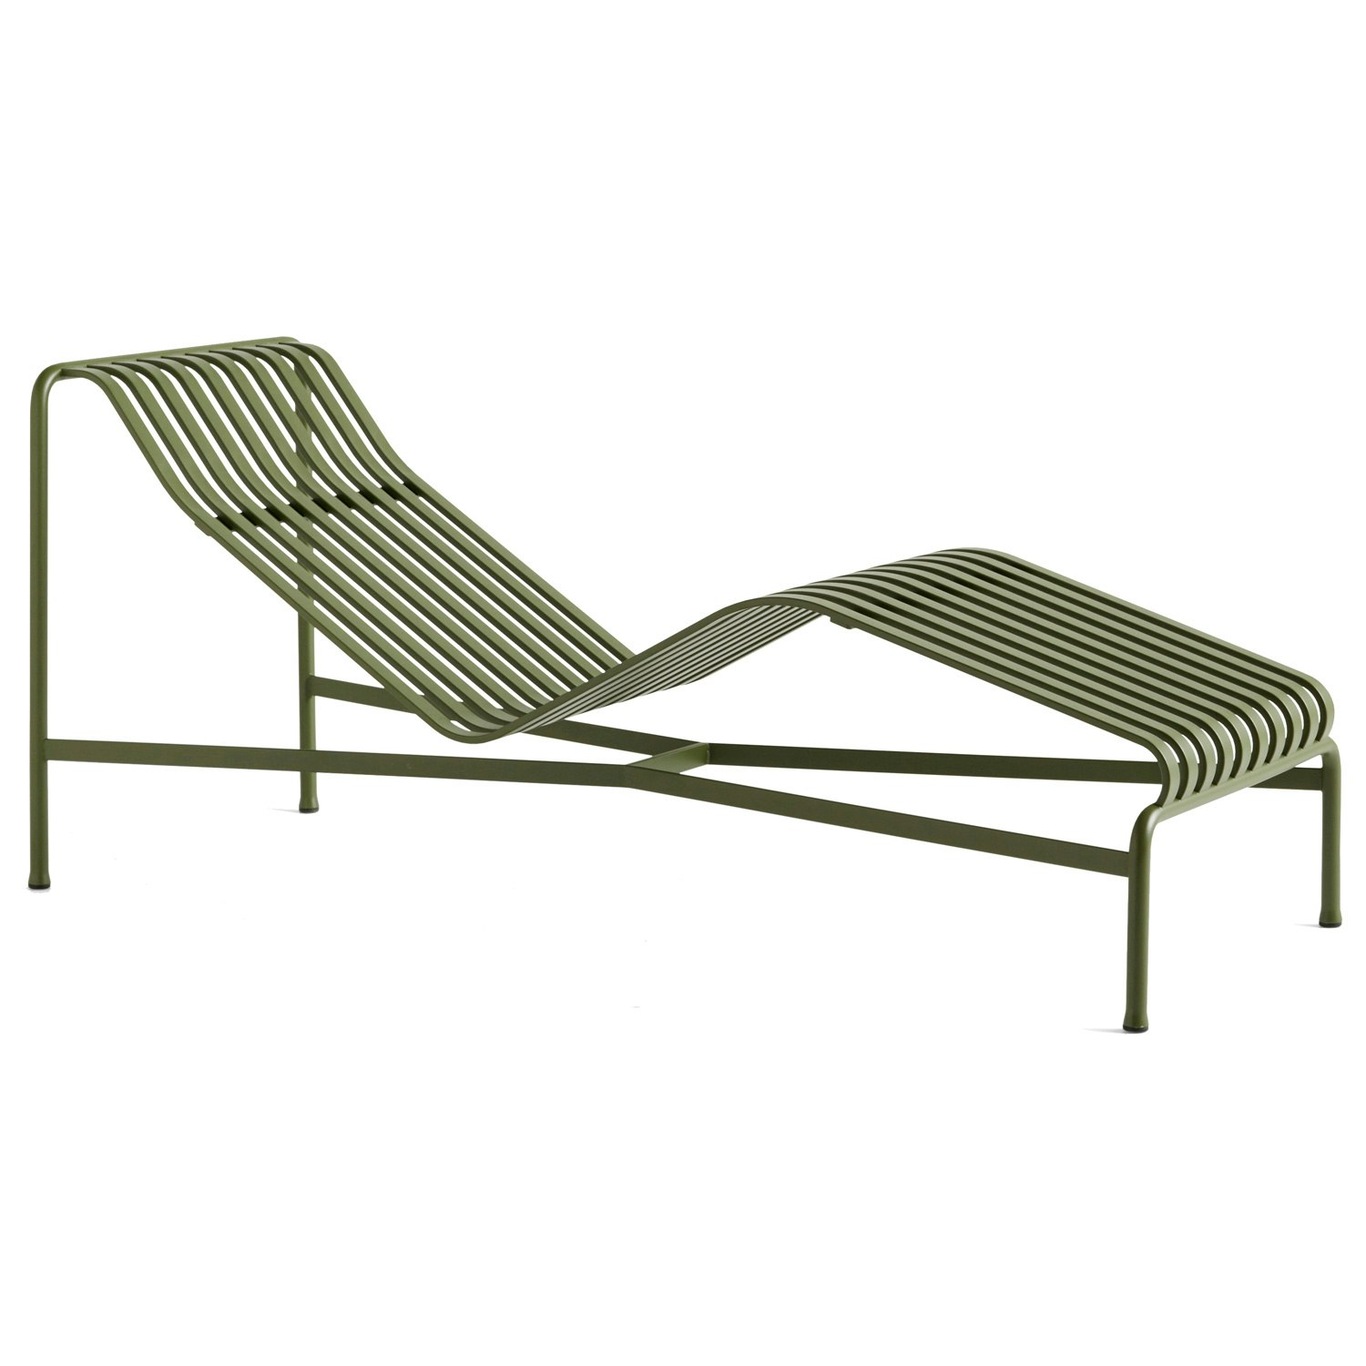 Palissade Chaise Longue, Olive